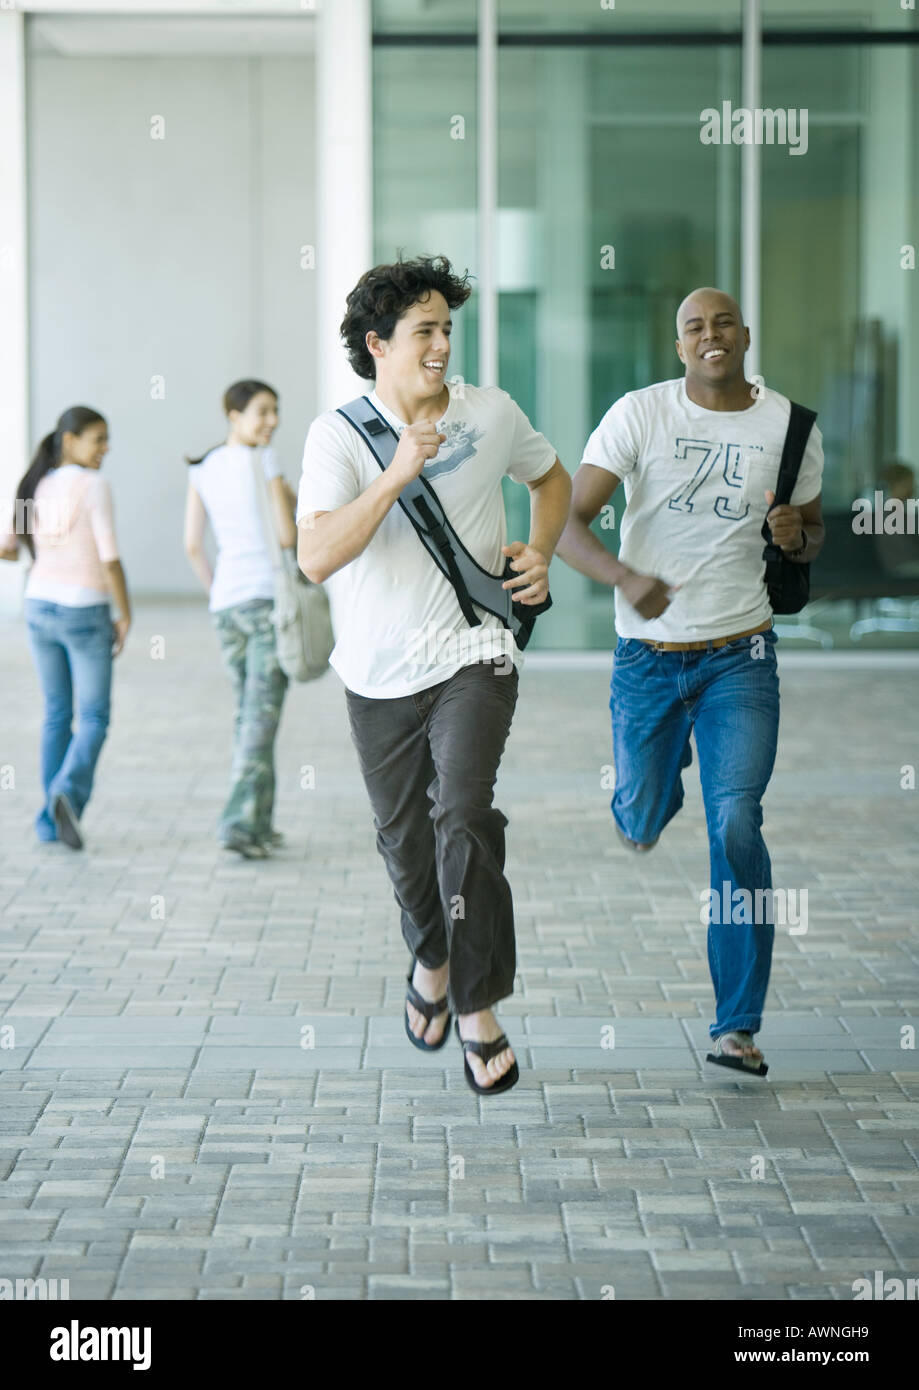 College students running on campus Stock Photo